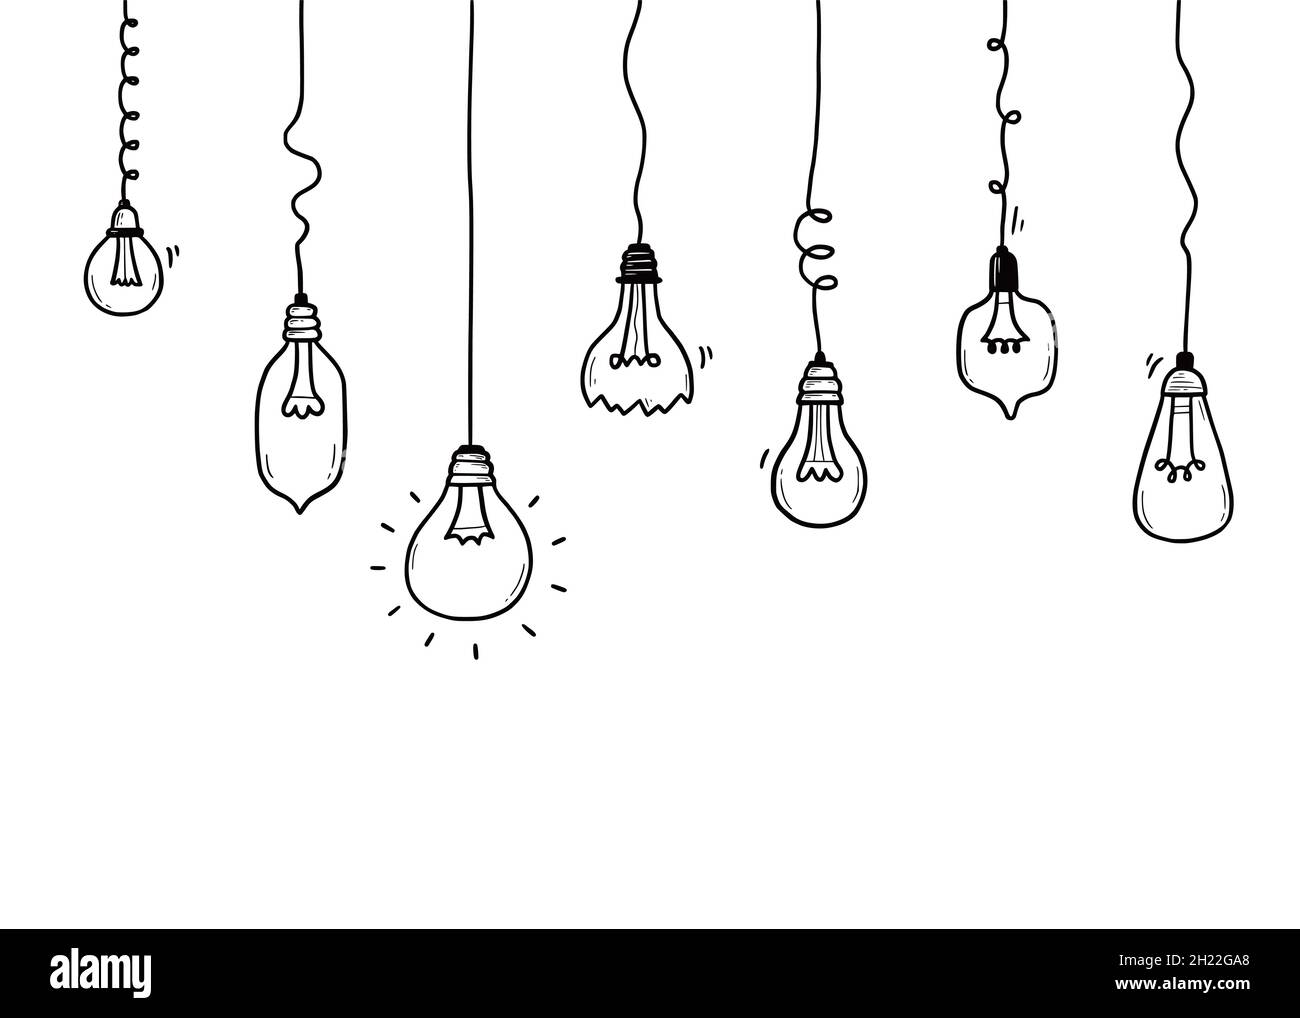 Light bulb set. Doodle hand drawn sketch style lamp. Concept of